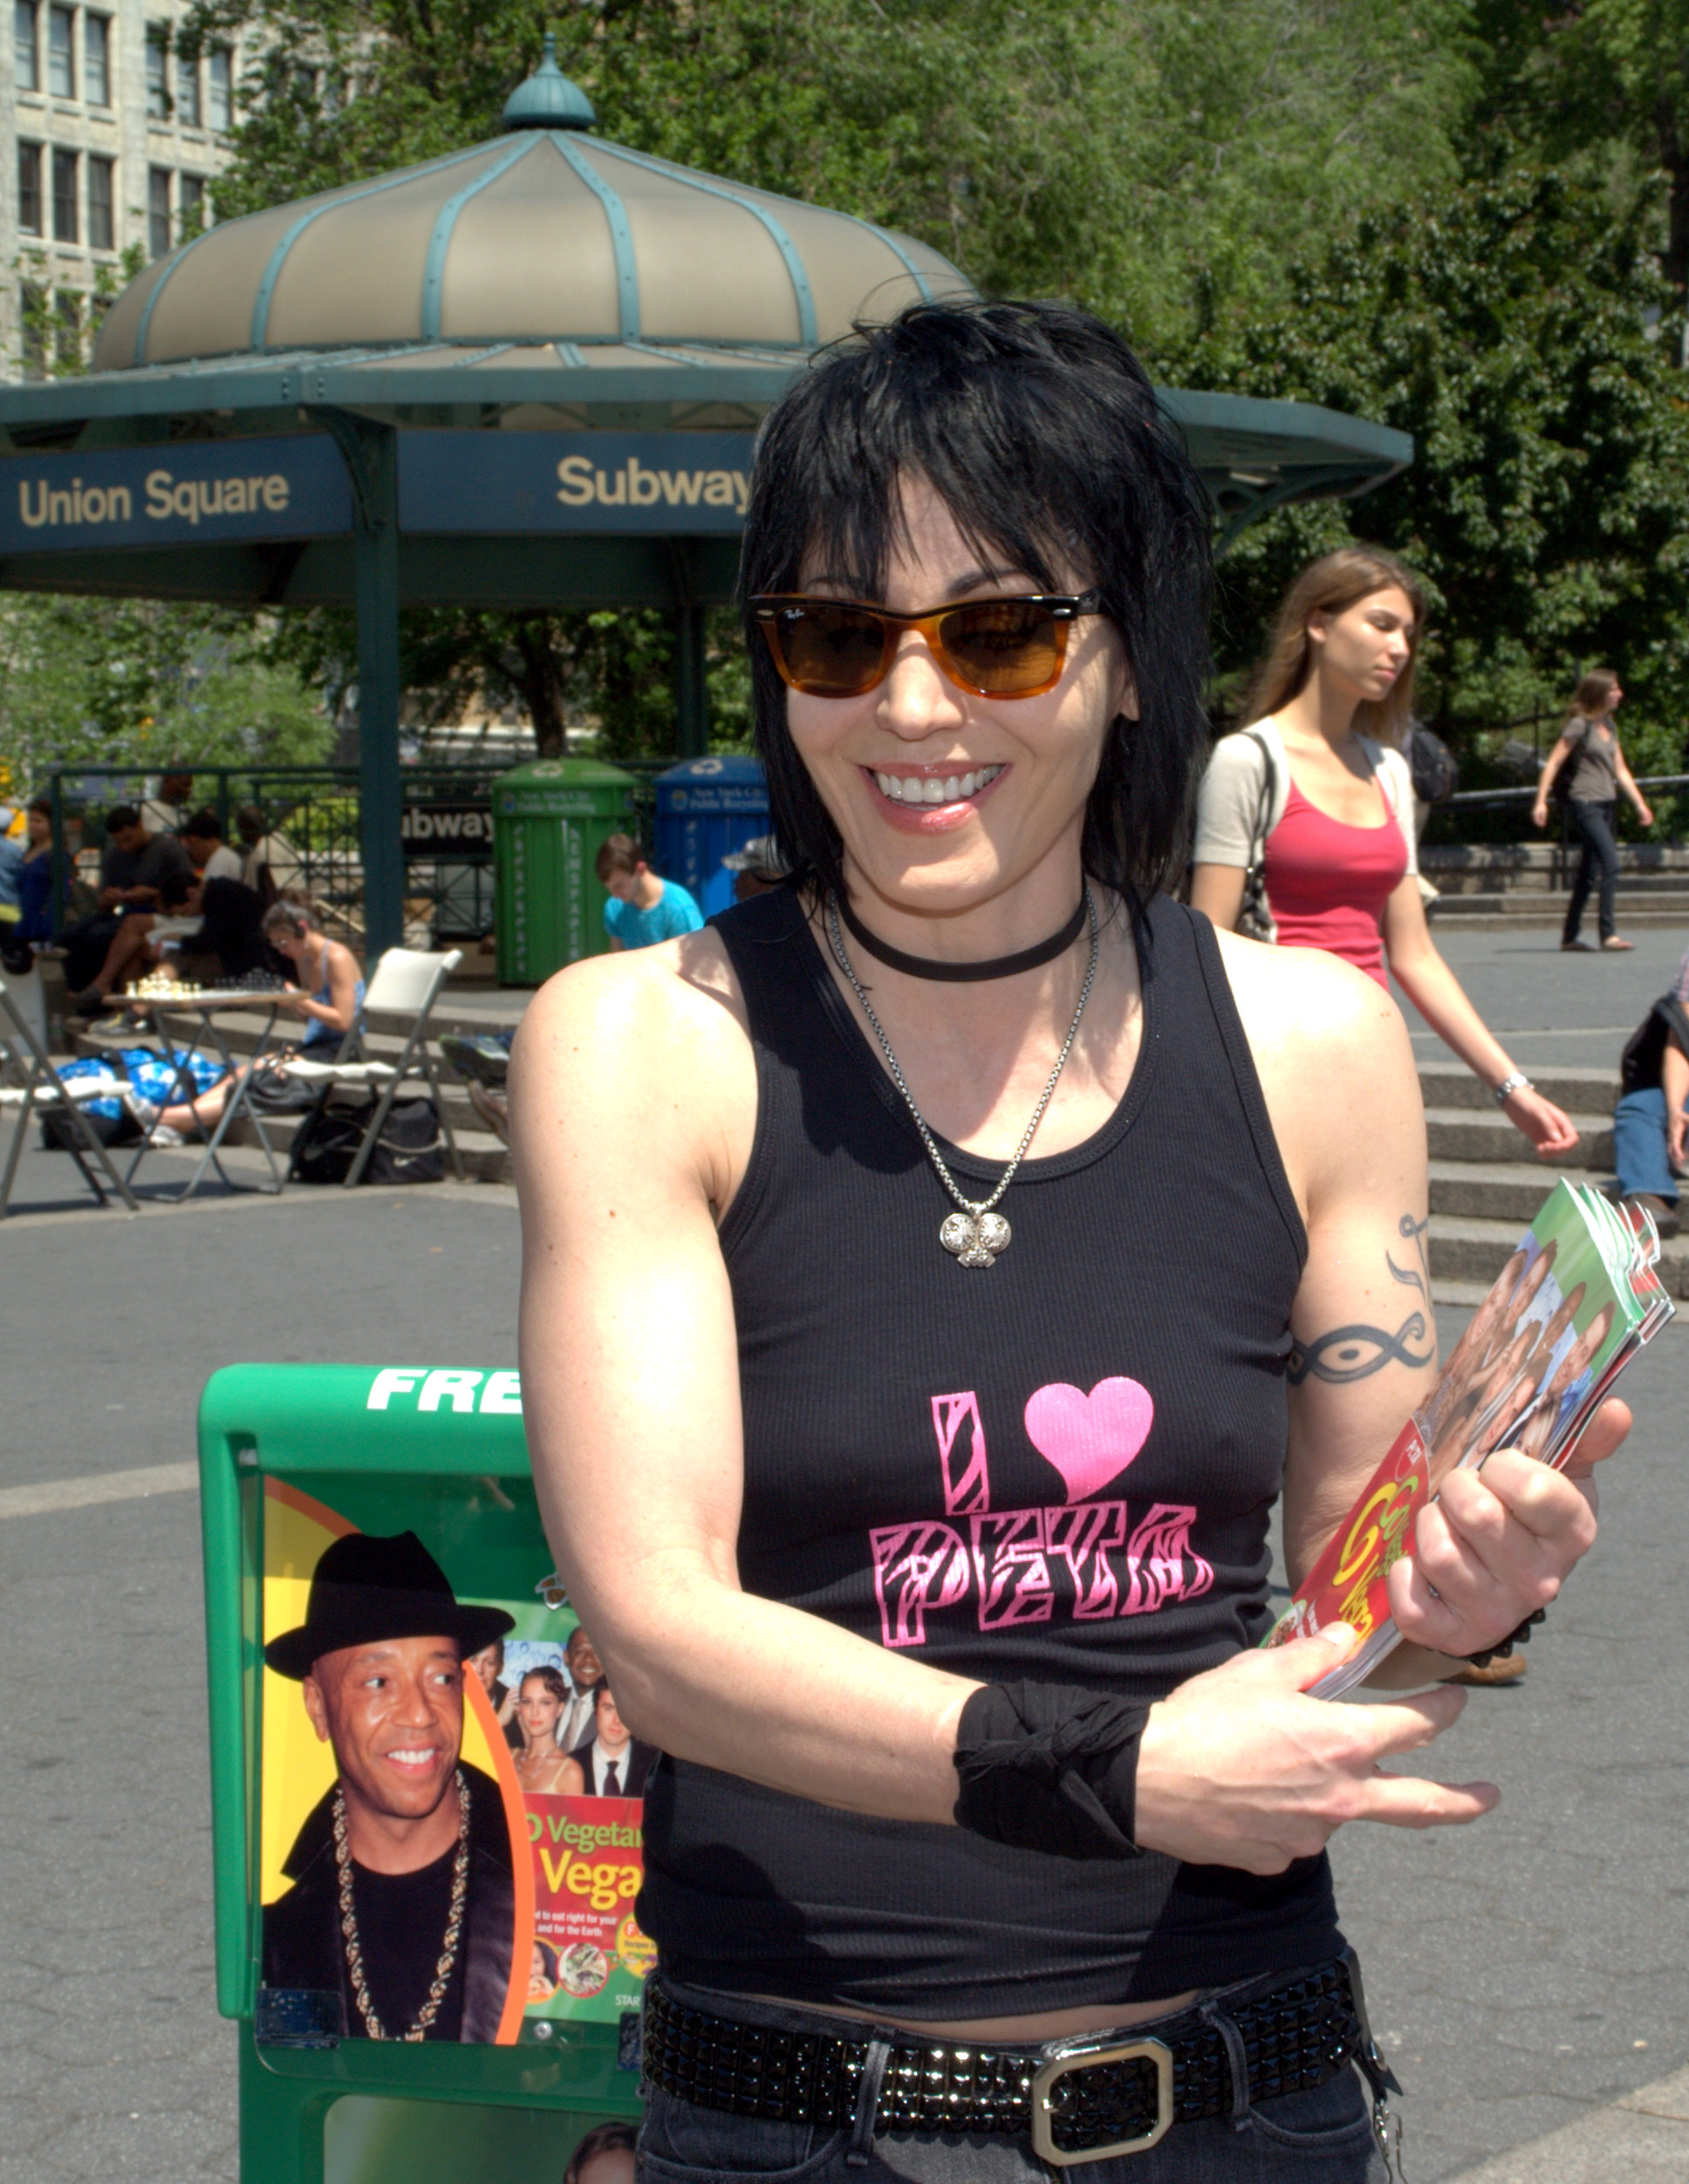 Joan jett by Union Square holding brochures